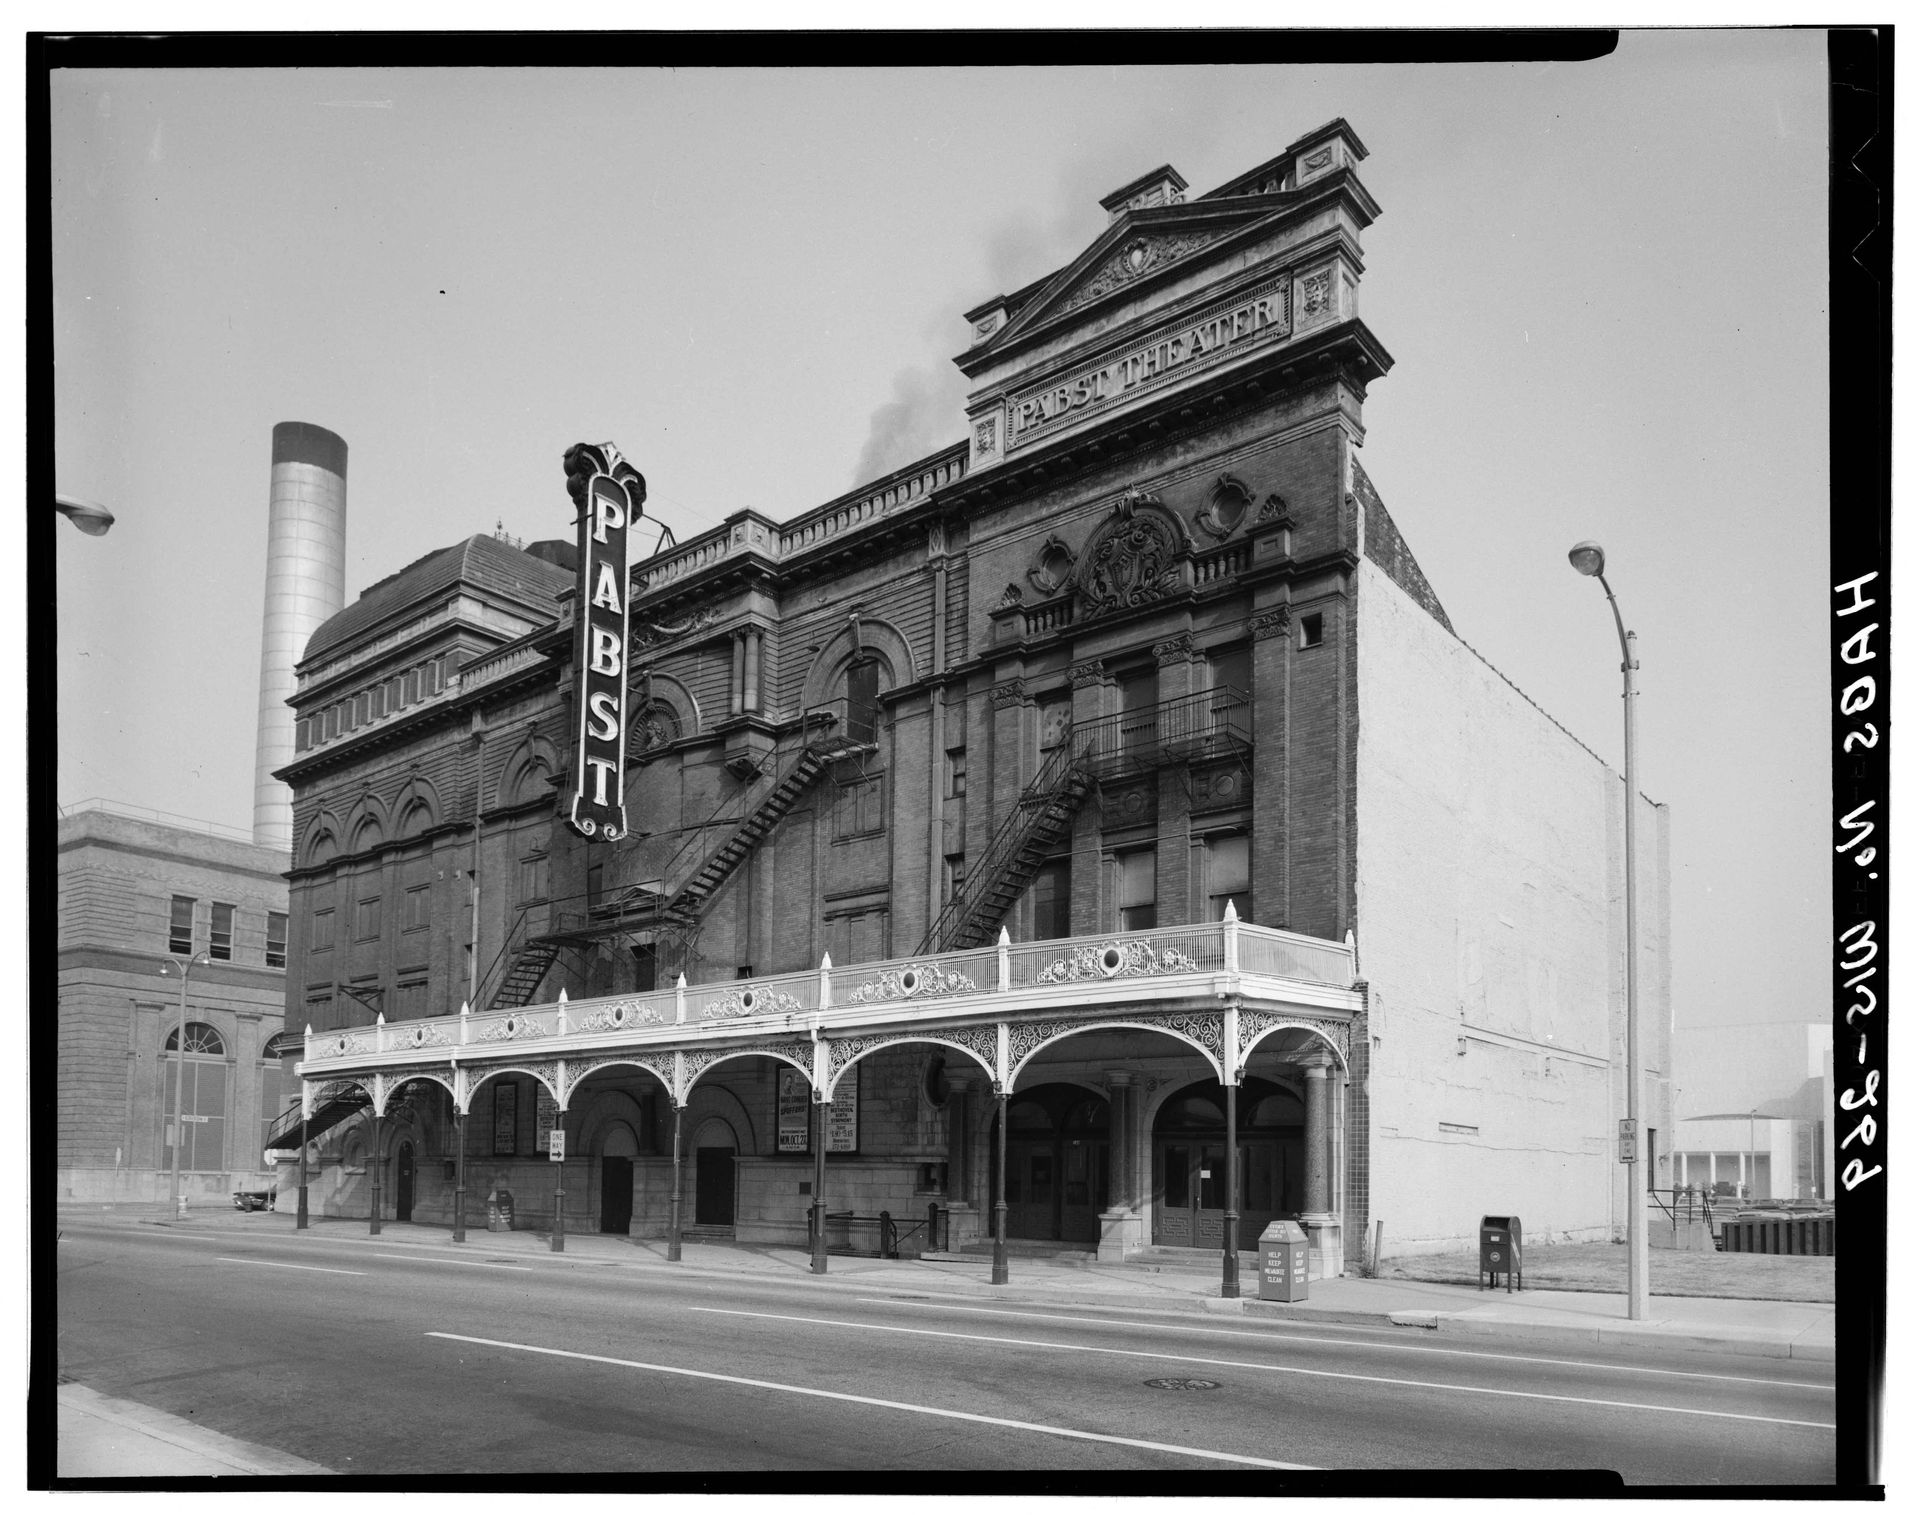 Milwaukee Ghost Tour Pabst Theater in 1933